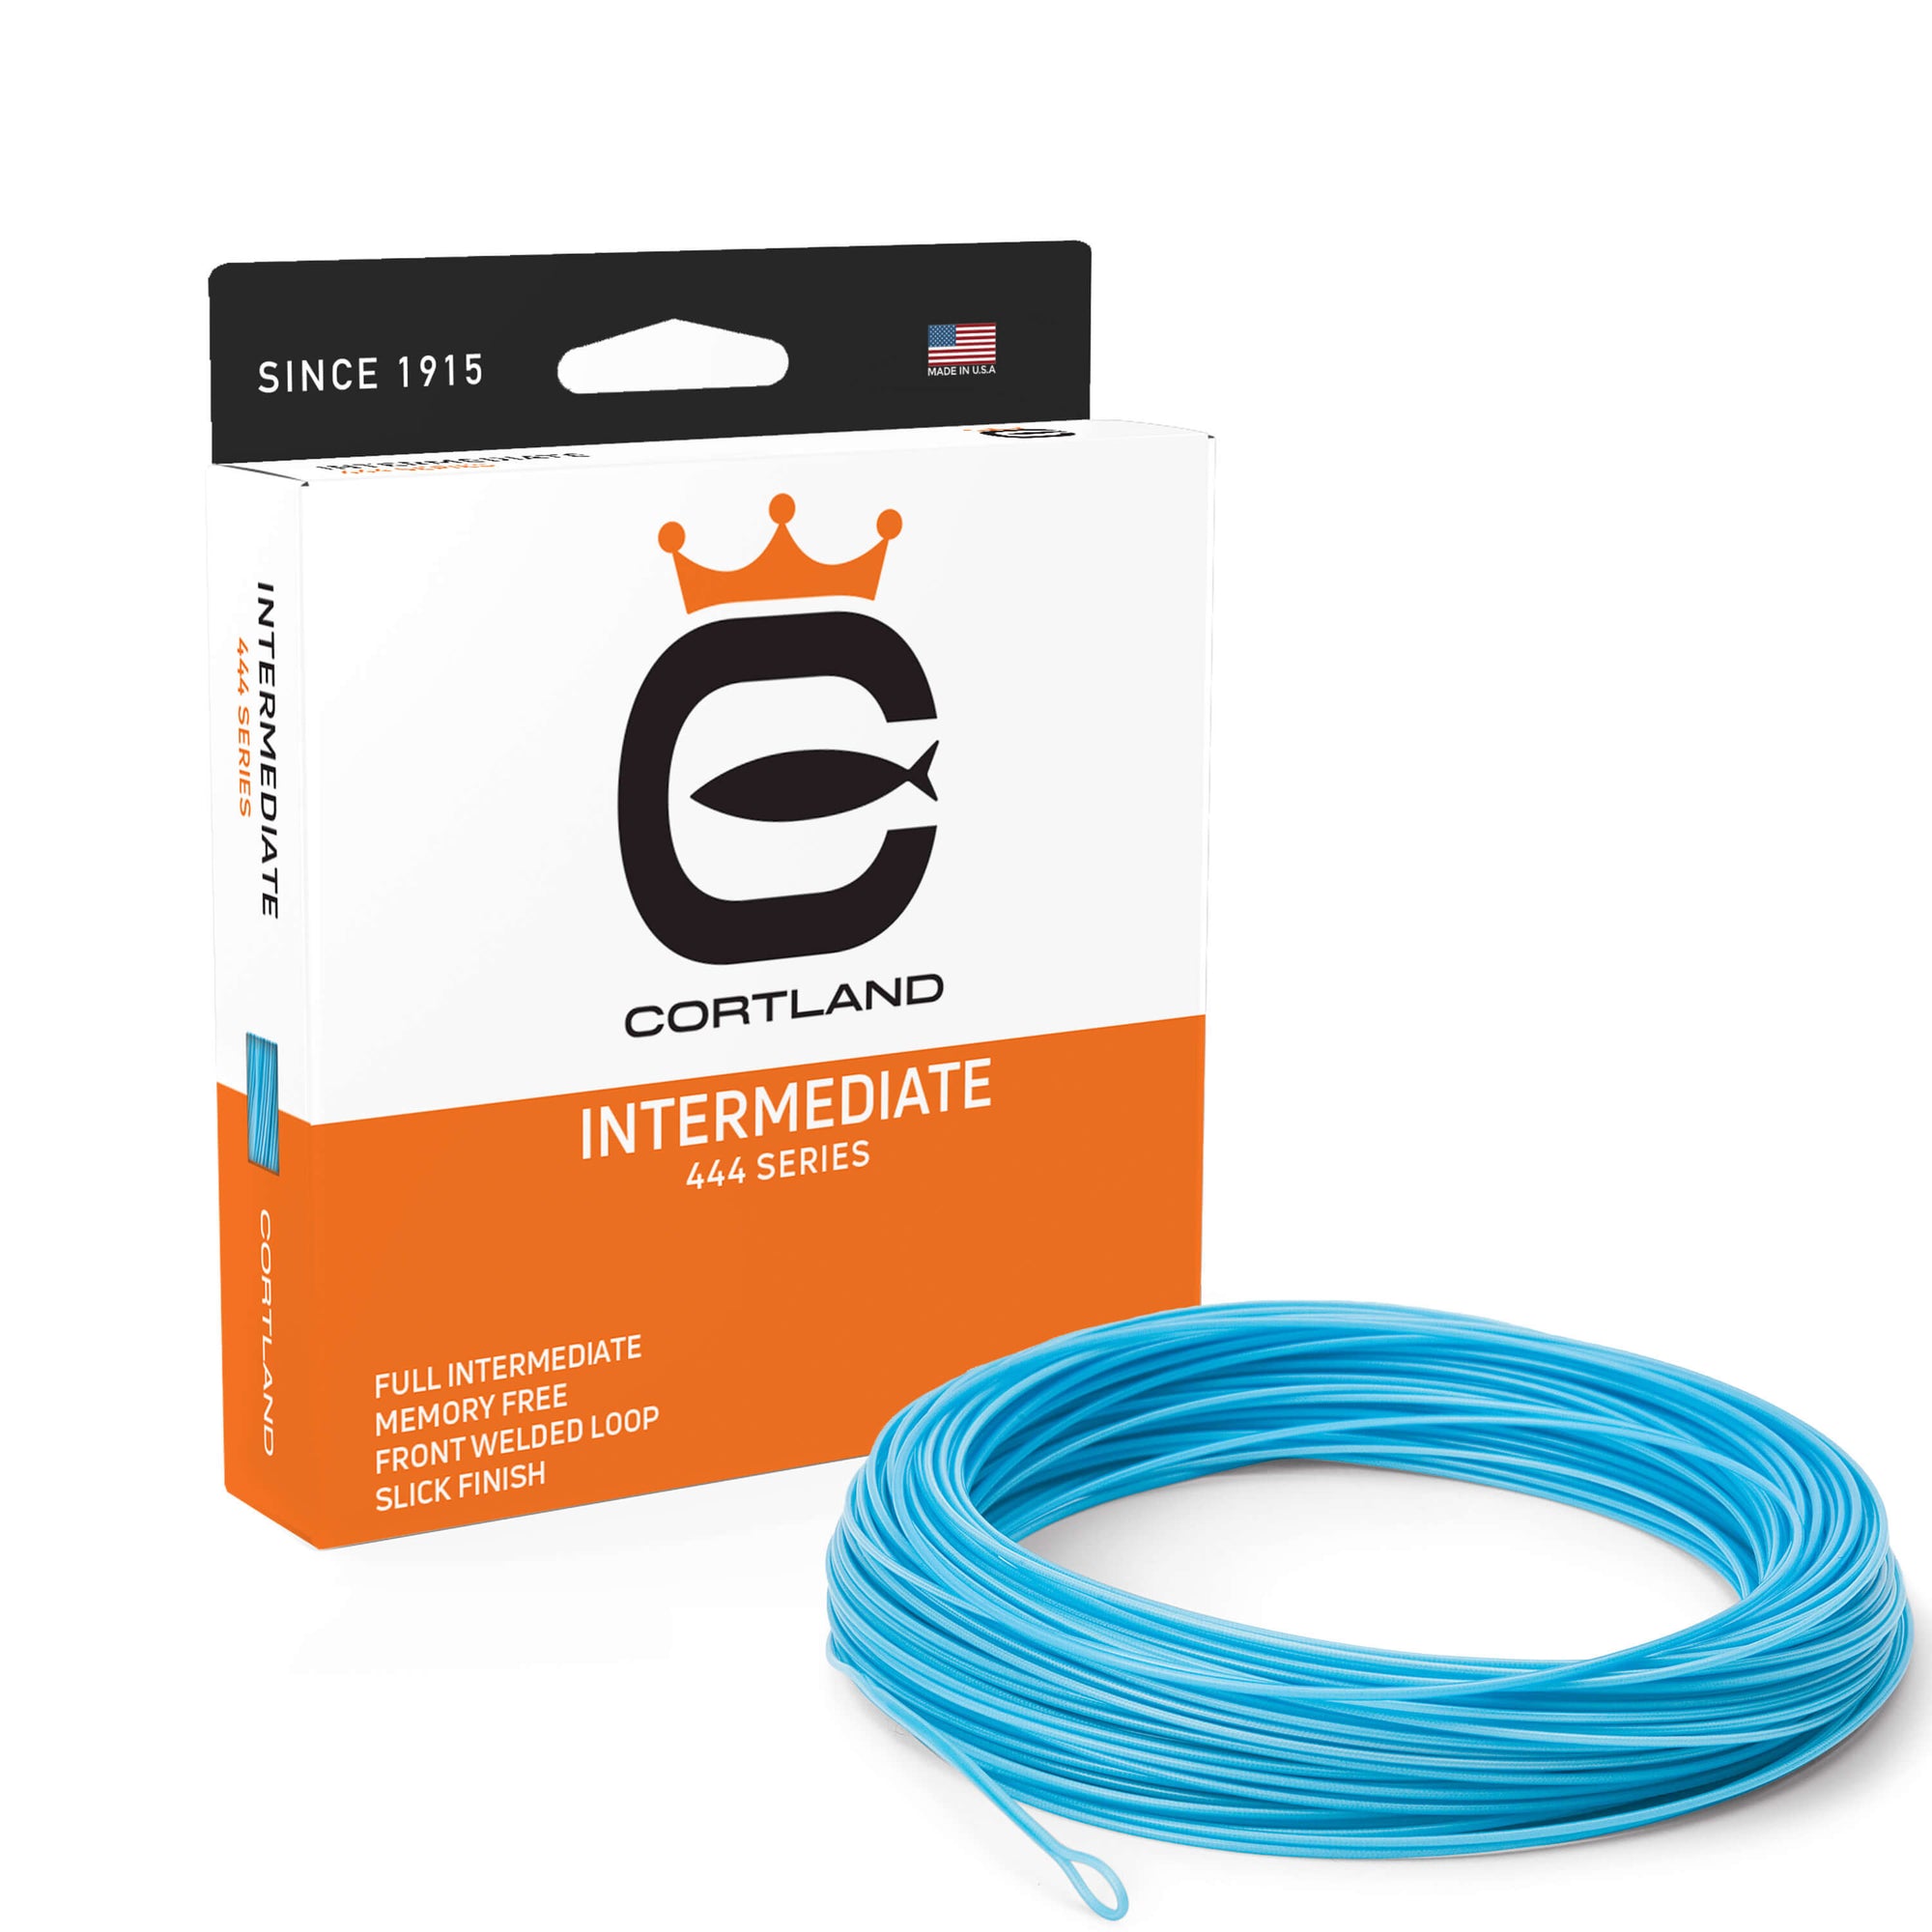 444 Series Intermediate Fly Line and box. The coil is ice blue. The box is orange, white, and black. 